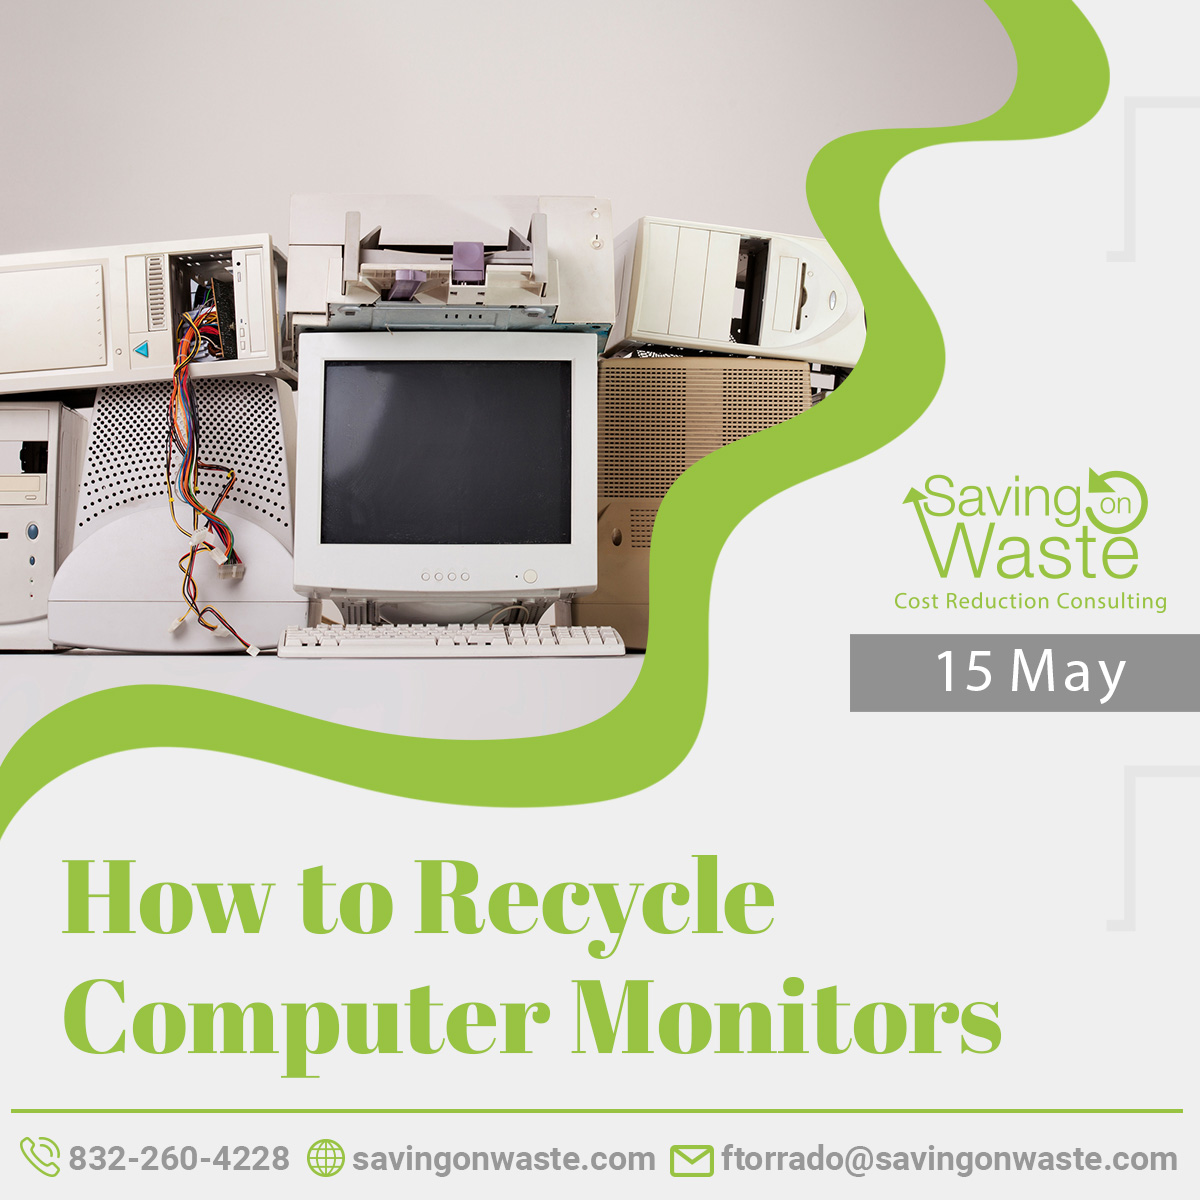 15 BLOG How to Recycle Computer Monitors